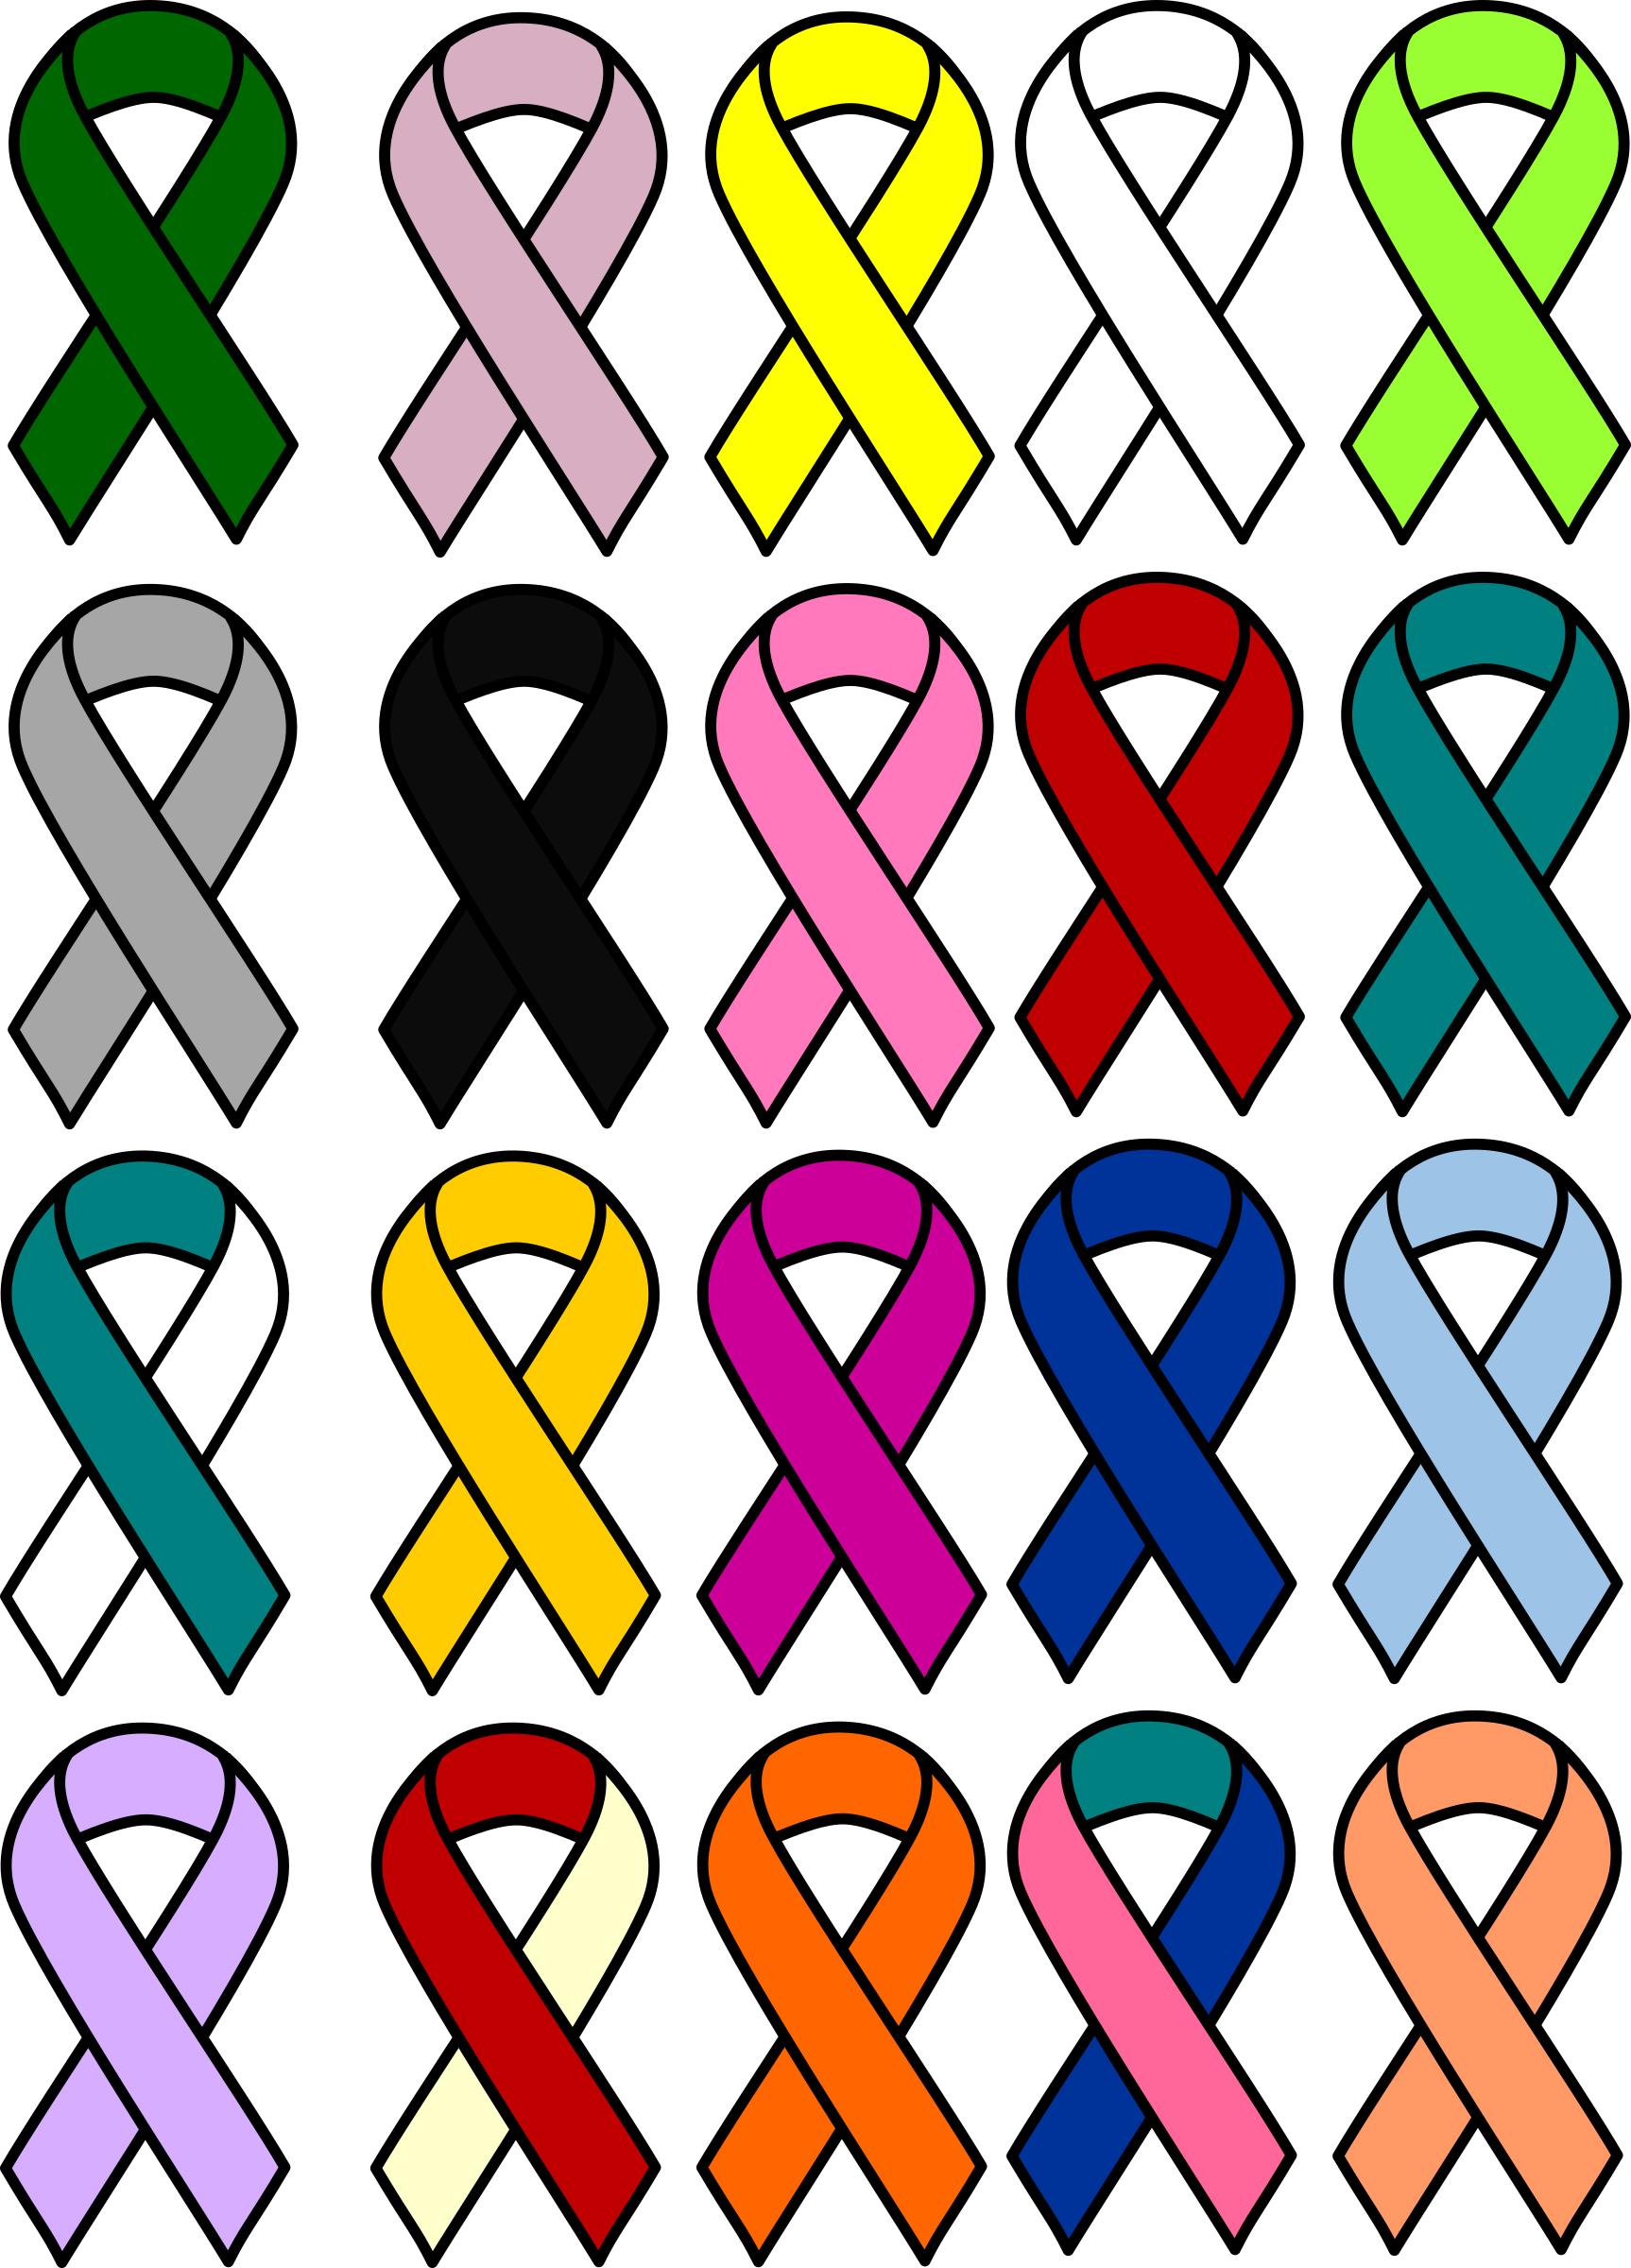 Cancer Ribbons png